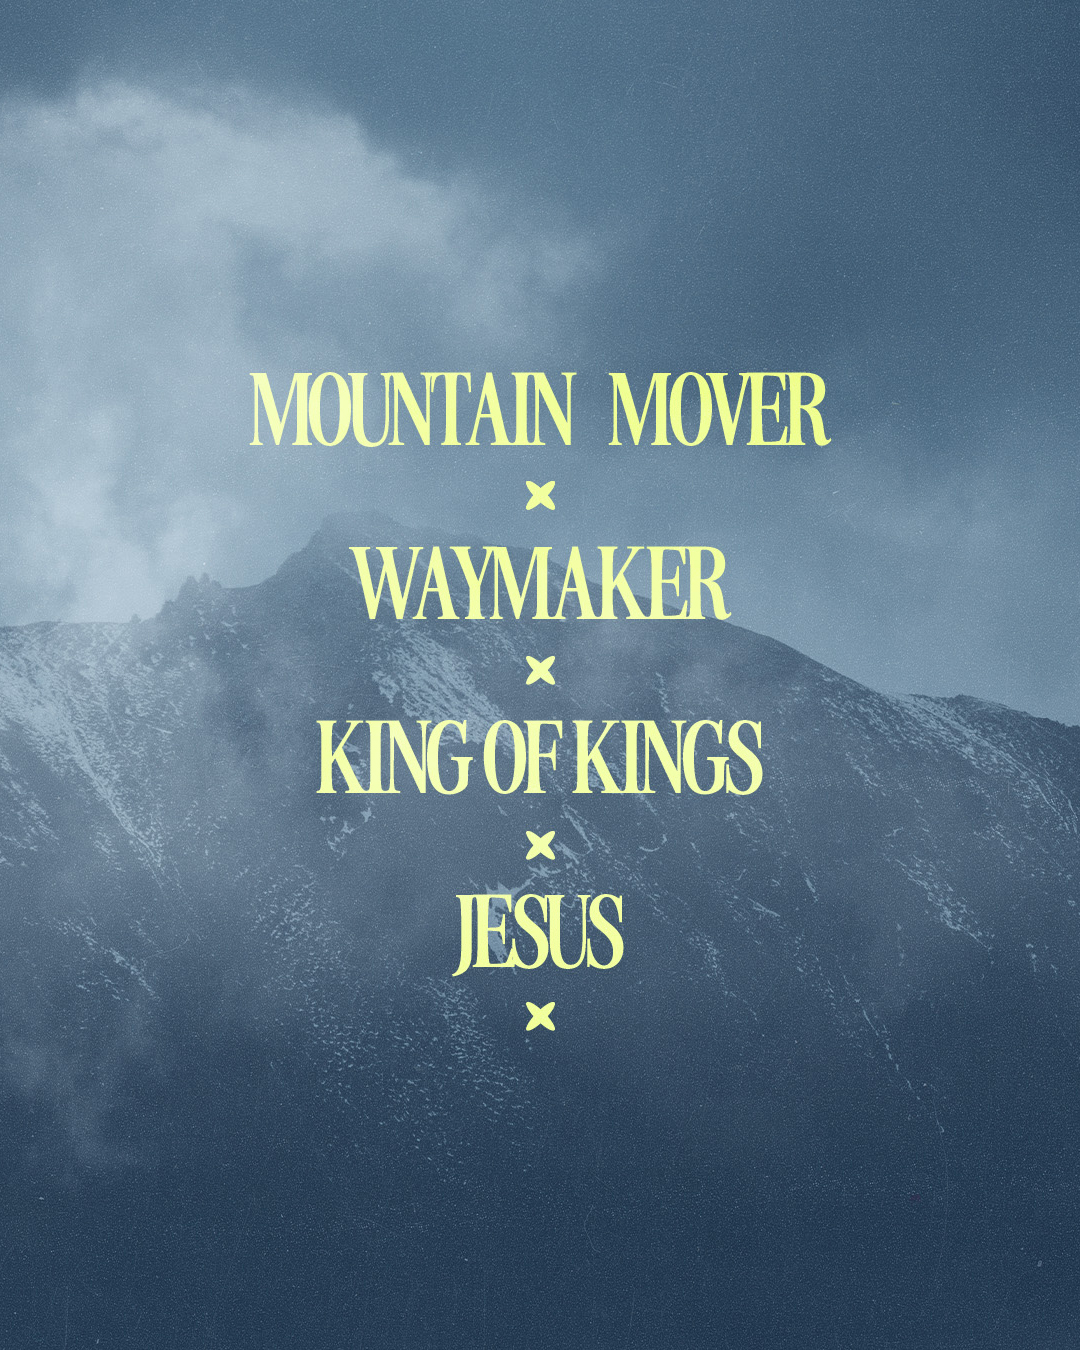 Mountain Mover * Waymaker* King of Kings* Jesus*